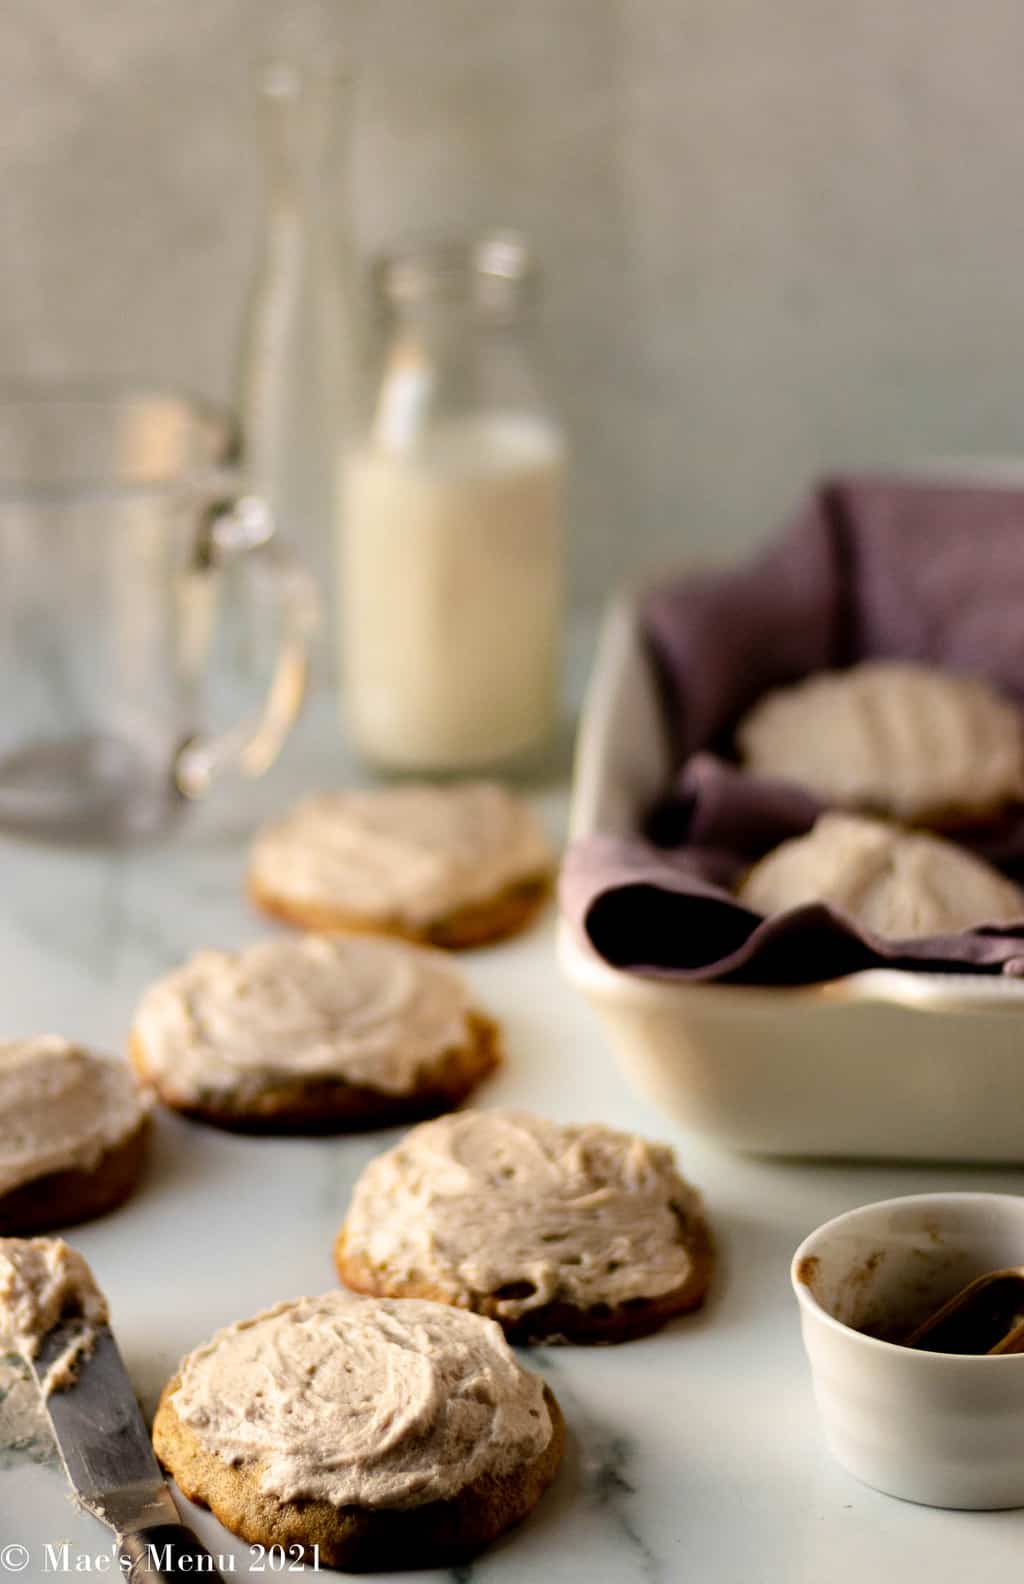 Banana bread cookies on a counter next to a tray of cookies and milk bottles and glasses